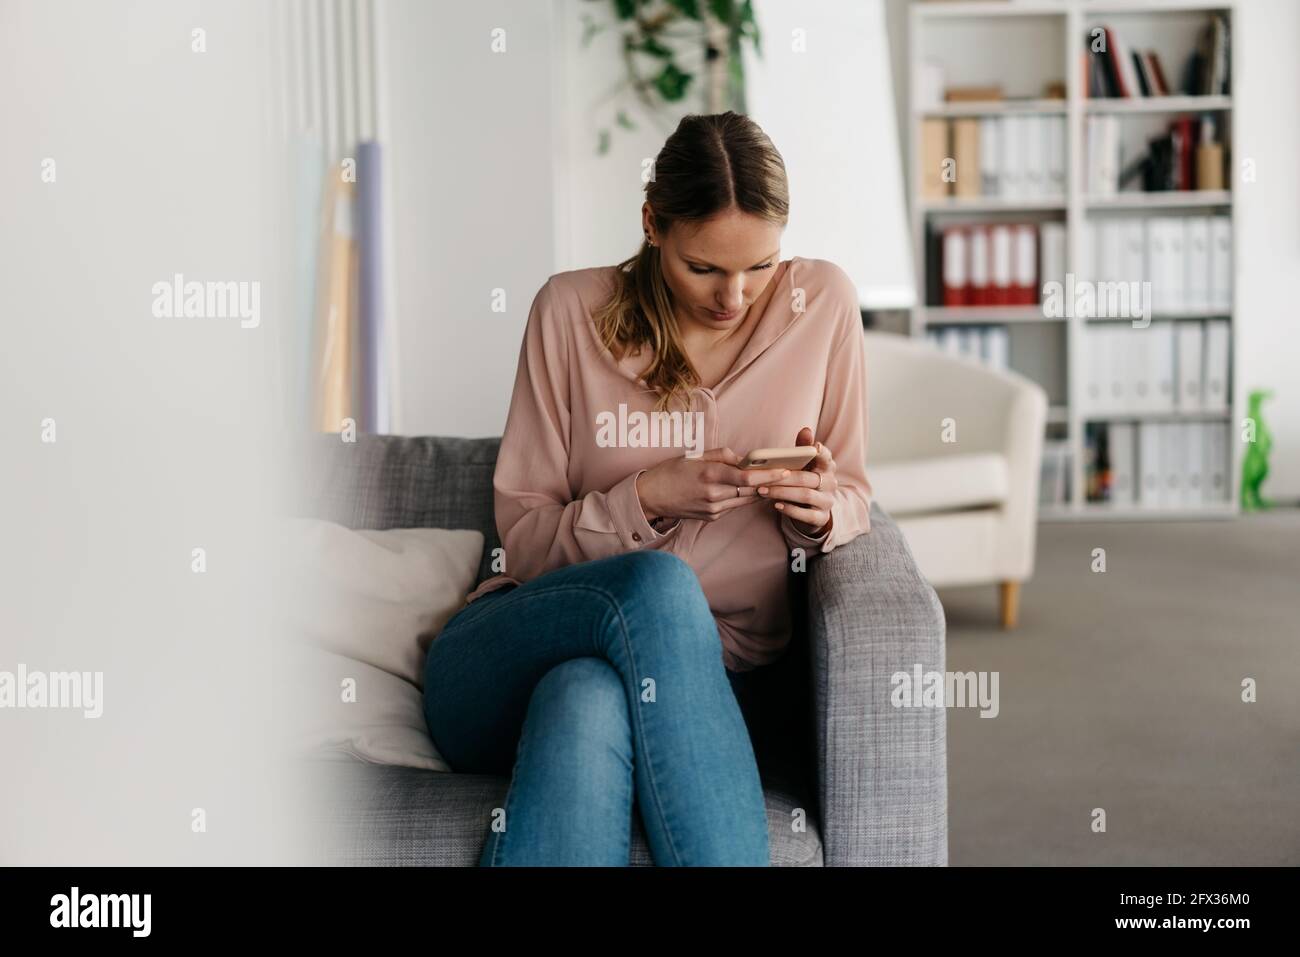 Young woman reading with concentration a message or browsing the internet on the mobile phone while sitting on a sofa in a modern office Stock Photo